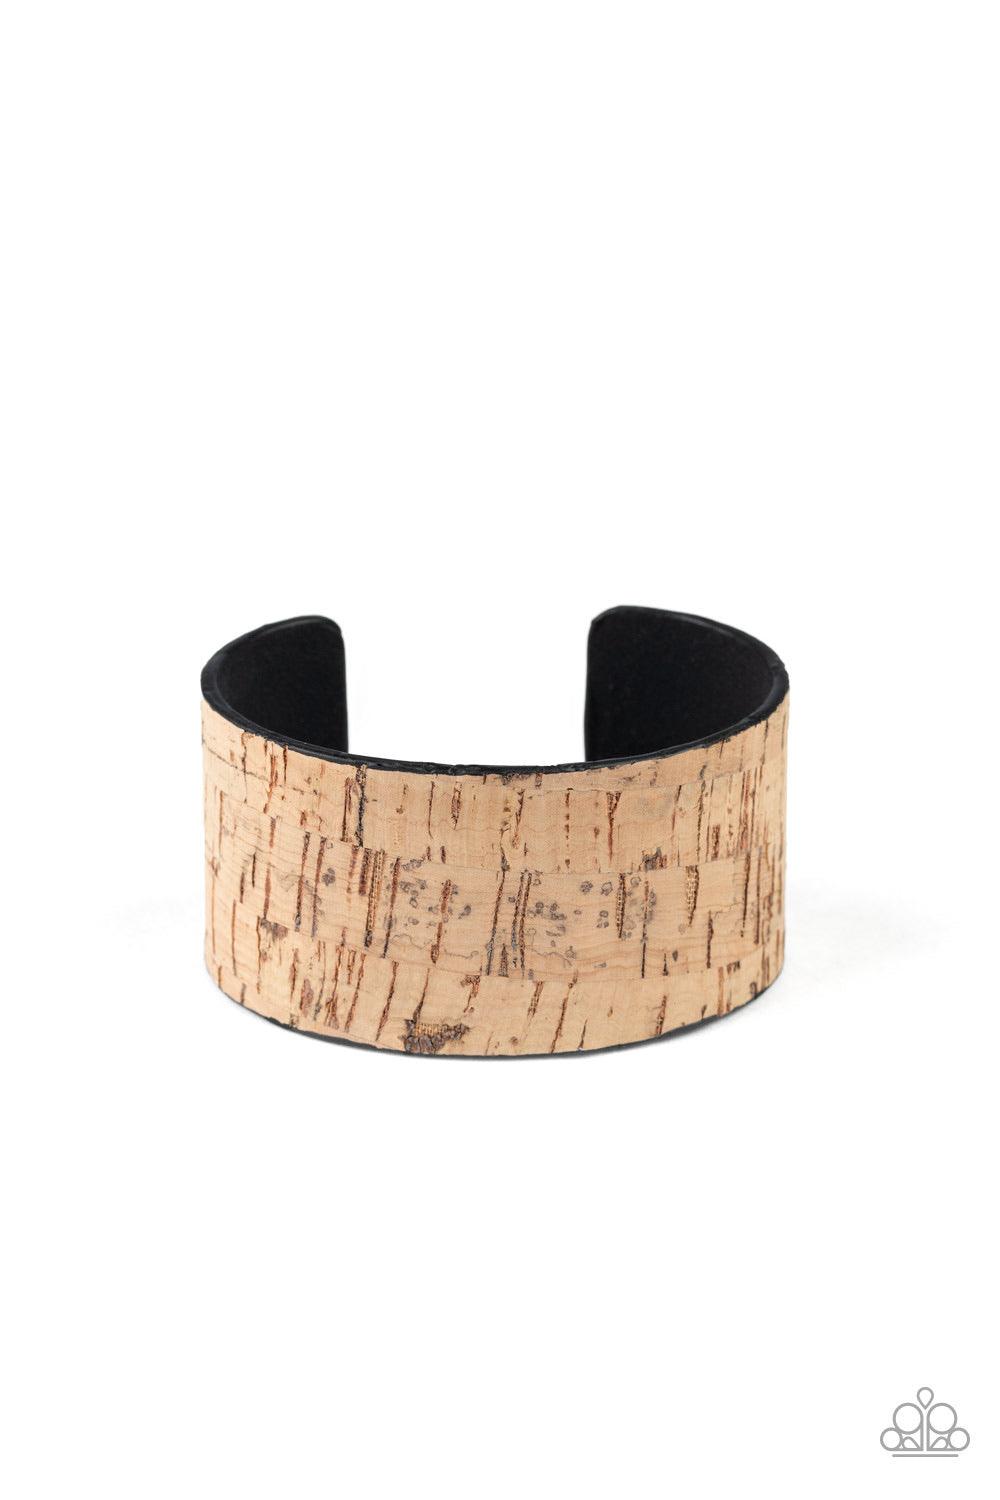 Paparazzi Accessories Cork Couture - Brown Featuring a cork-like finish, a thick cuff wraps around the wrist for a seasonal flair. Jewelry